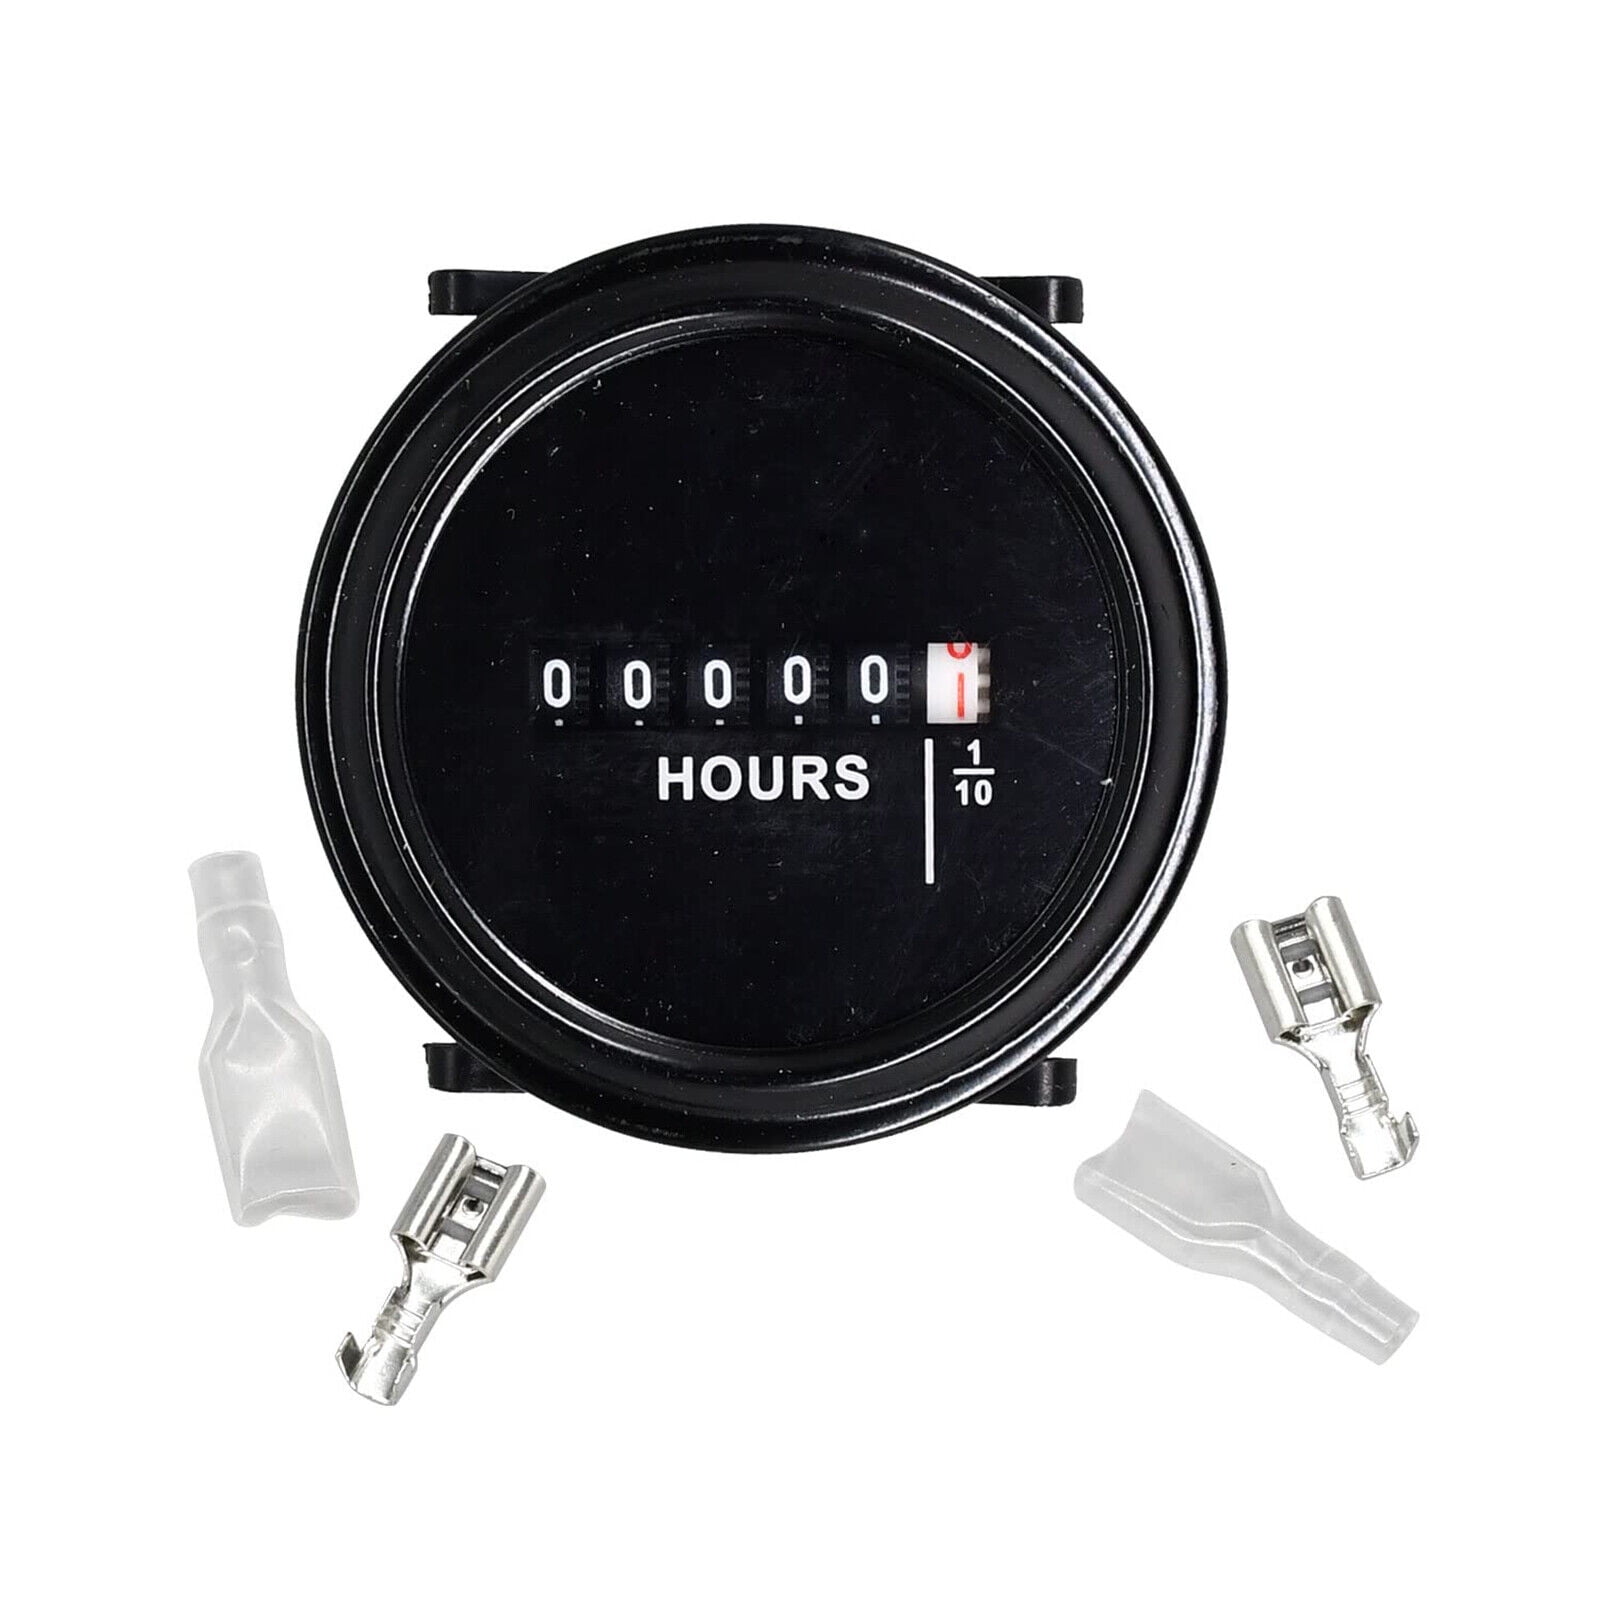 FridayParts Hour Meter 19506GT for Genie Lift GR-08 GR-12 GR-20 GS-1530 GS-1930 GS-2646 GS-3390 QS-12R QS-15R S-40 S-60 S-80 Z-20/8 Z-45/25 Z-60/34 